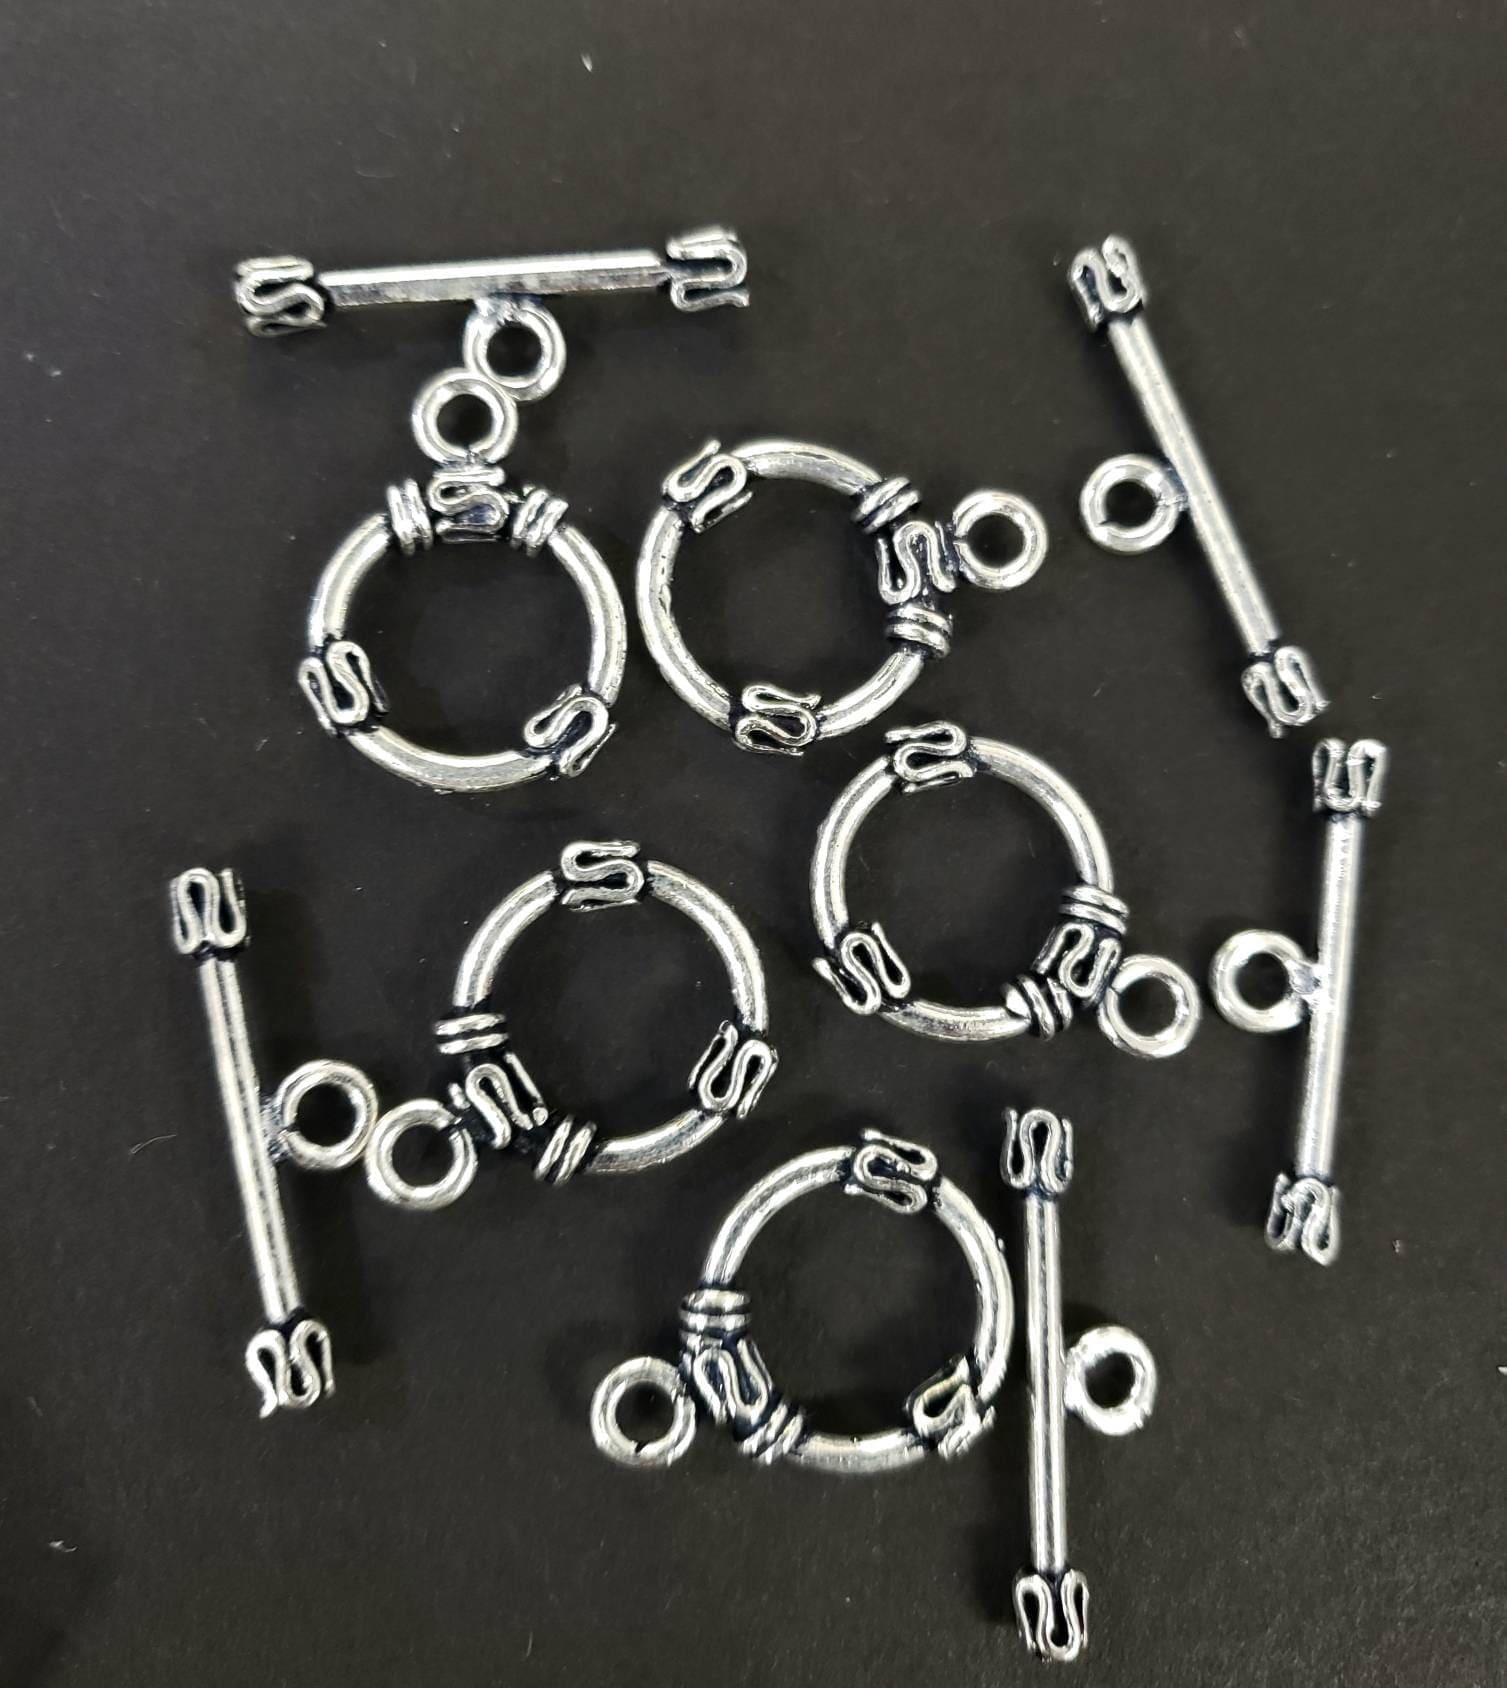 925 Sterling Silver Bali 15mm toggle clasp, vintage Handmade, antique heavy duty toggle clasp for jewelry making. 1 set or bulk